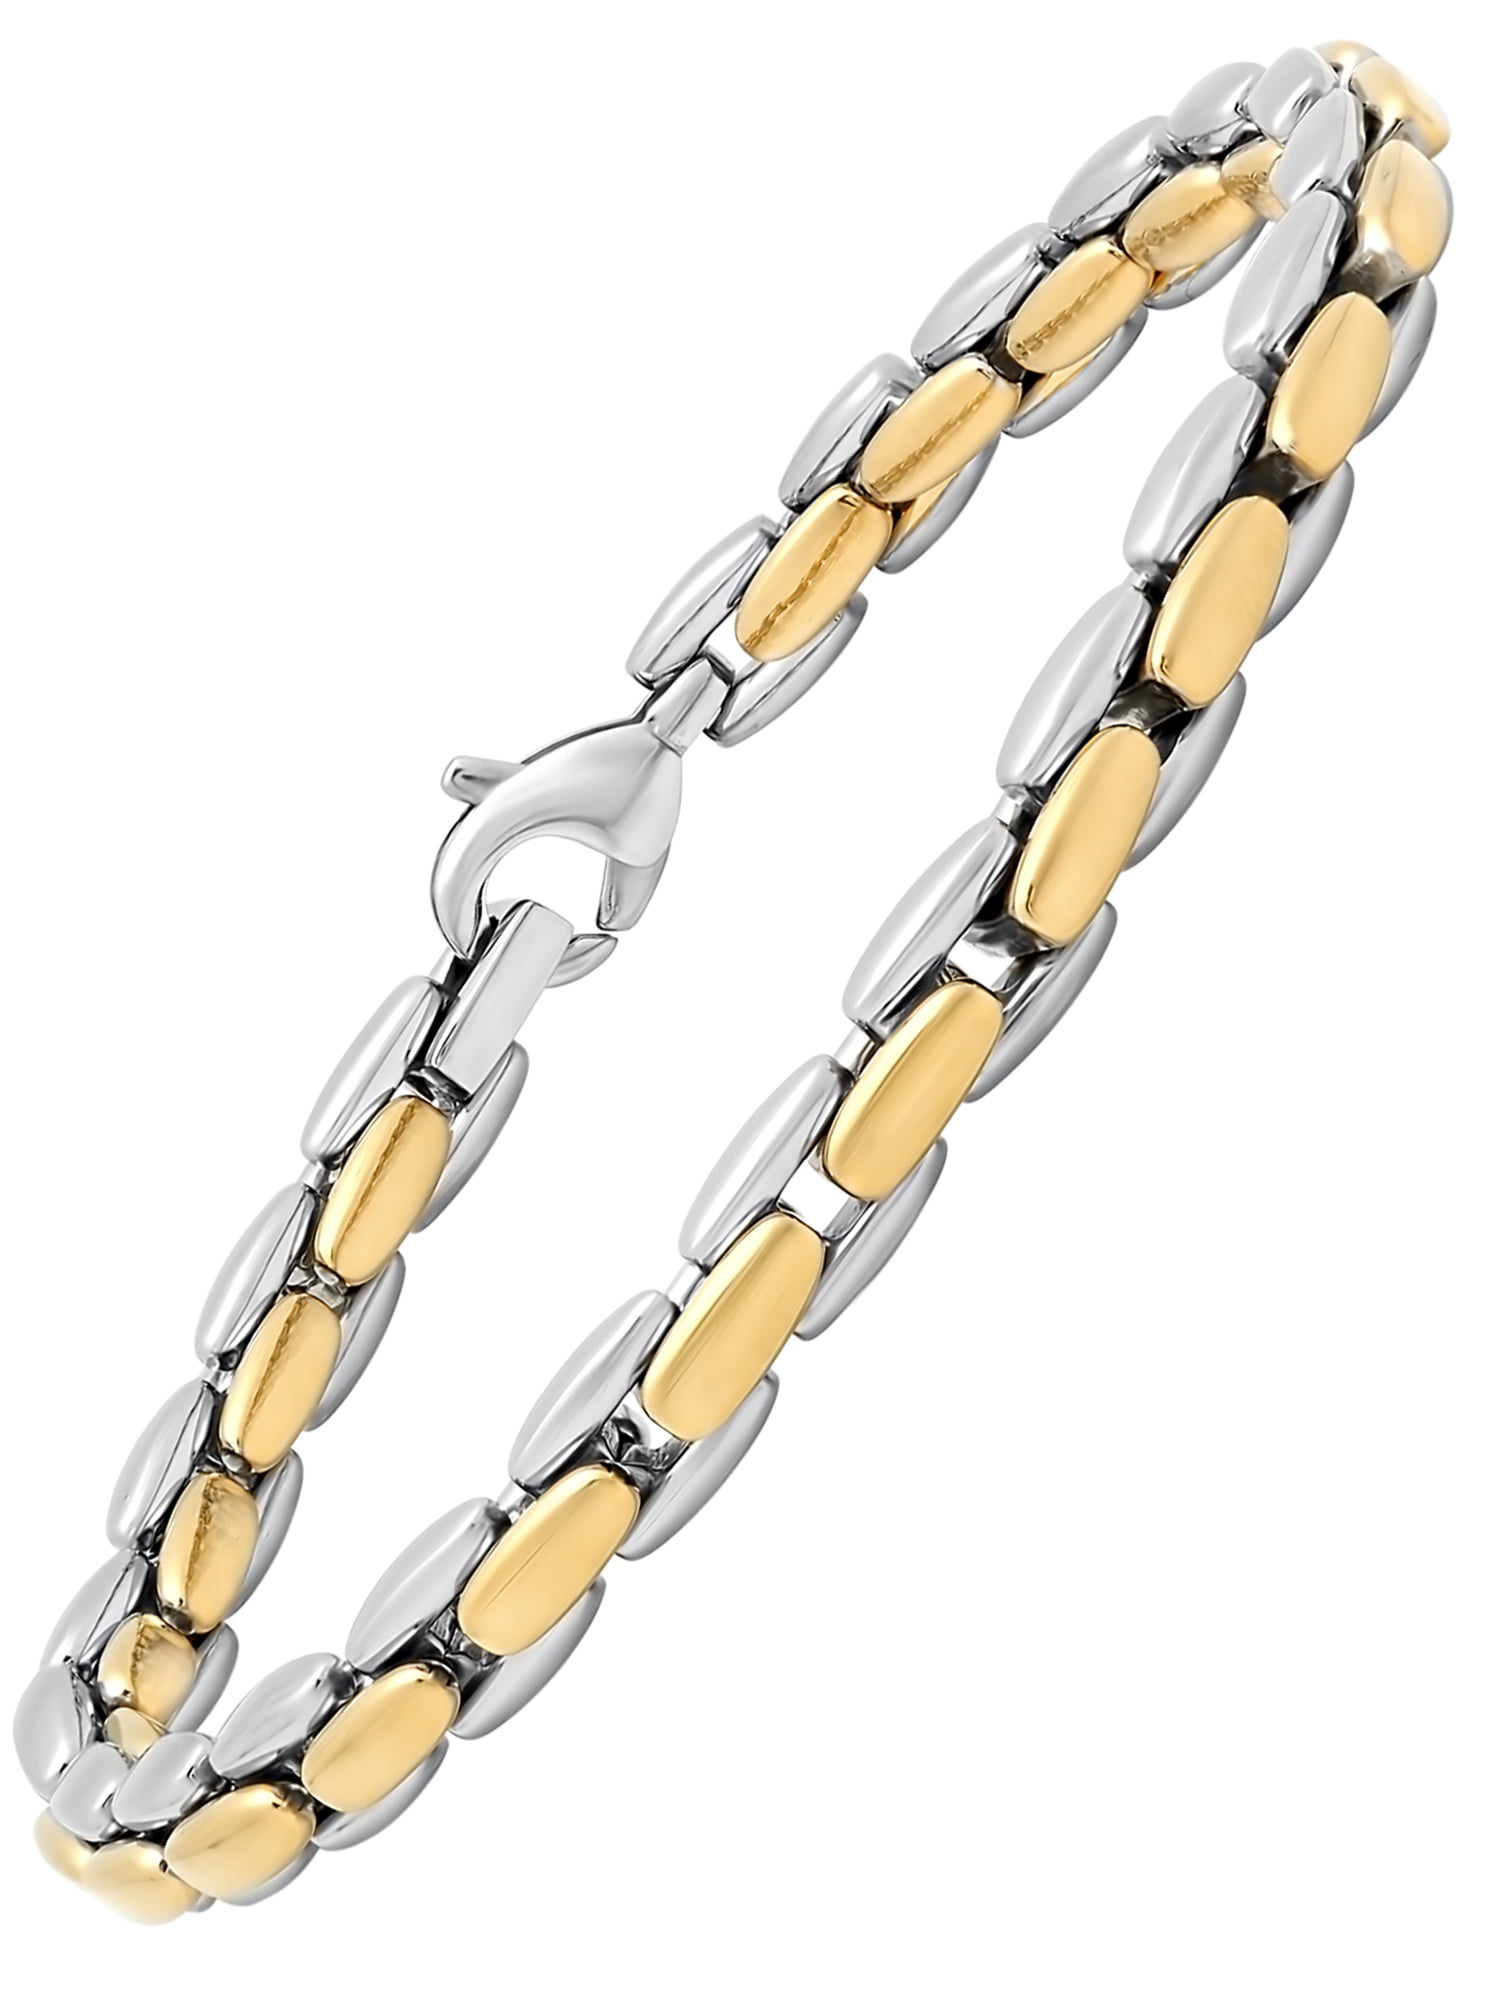 Two Tone Black Yellow 34 inch Wide Double Link Design Unisex Stainless Steel Motorcycle Chain Bracelet